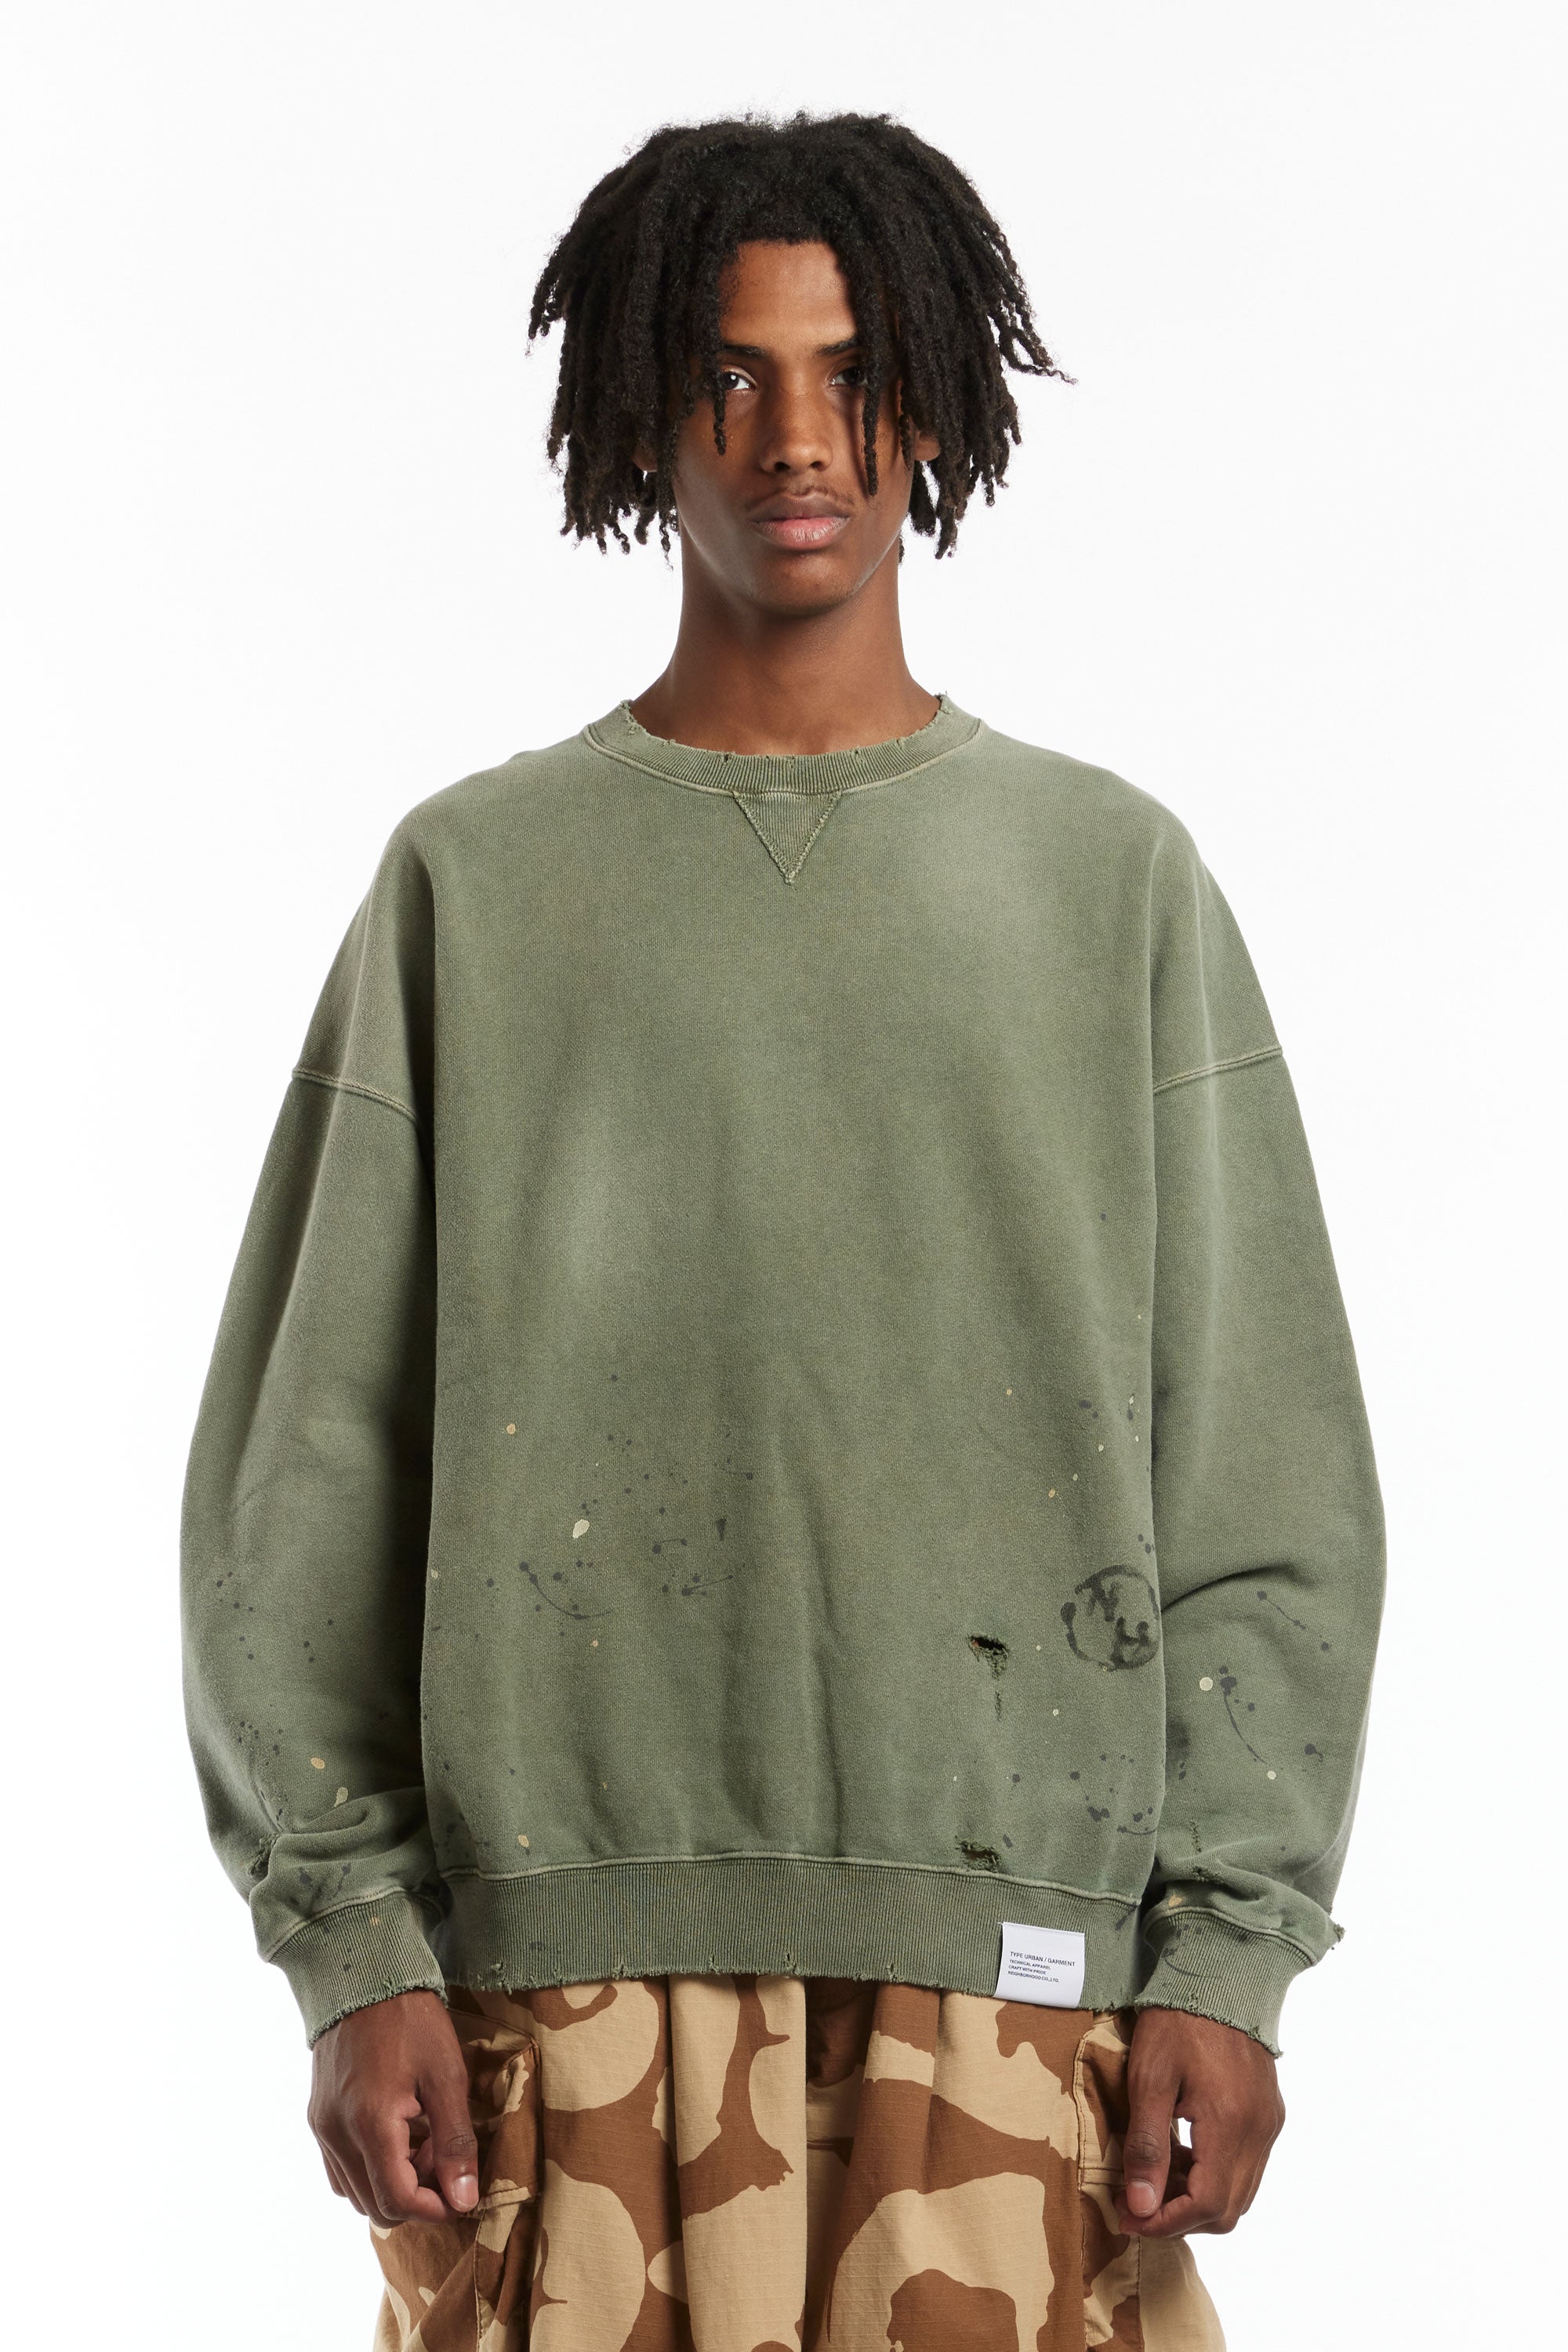 The NEIGHBORHOOD - DAMAGE SWEATSHIRT OLIVE DRAB available online with global shipping, and in PAM Stores Melbourne and Sydney.